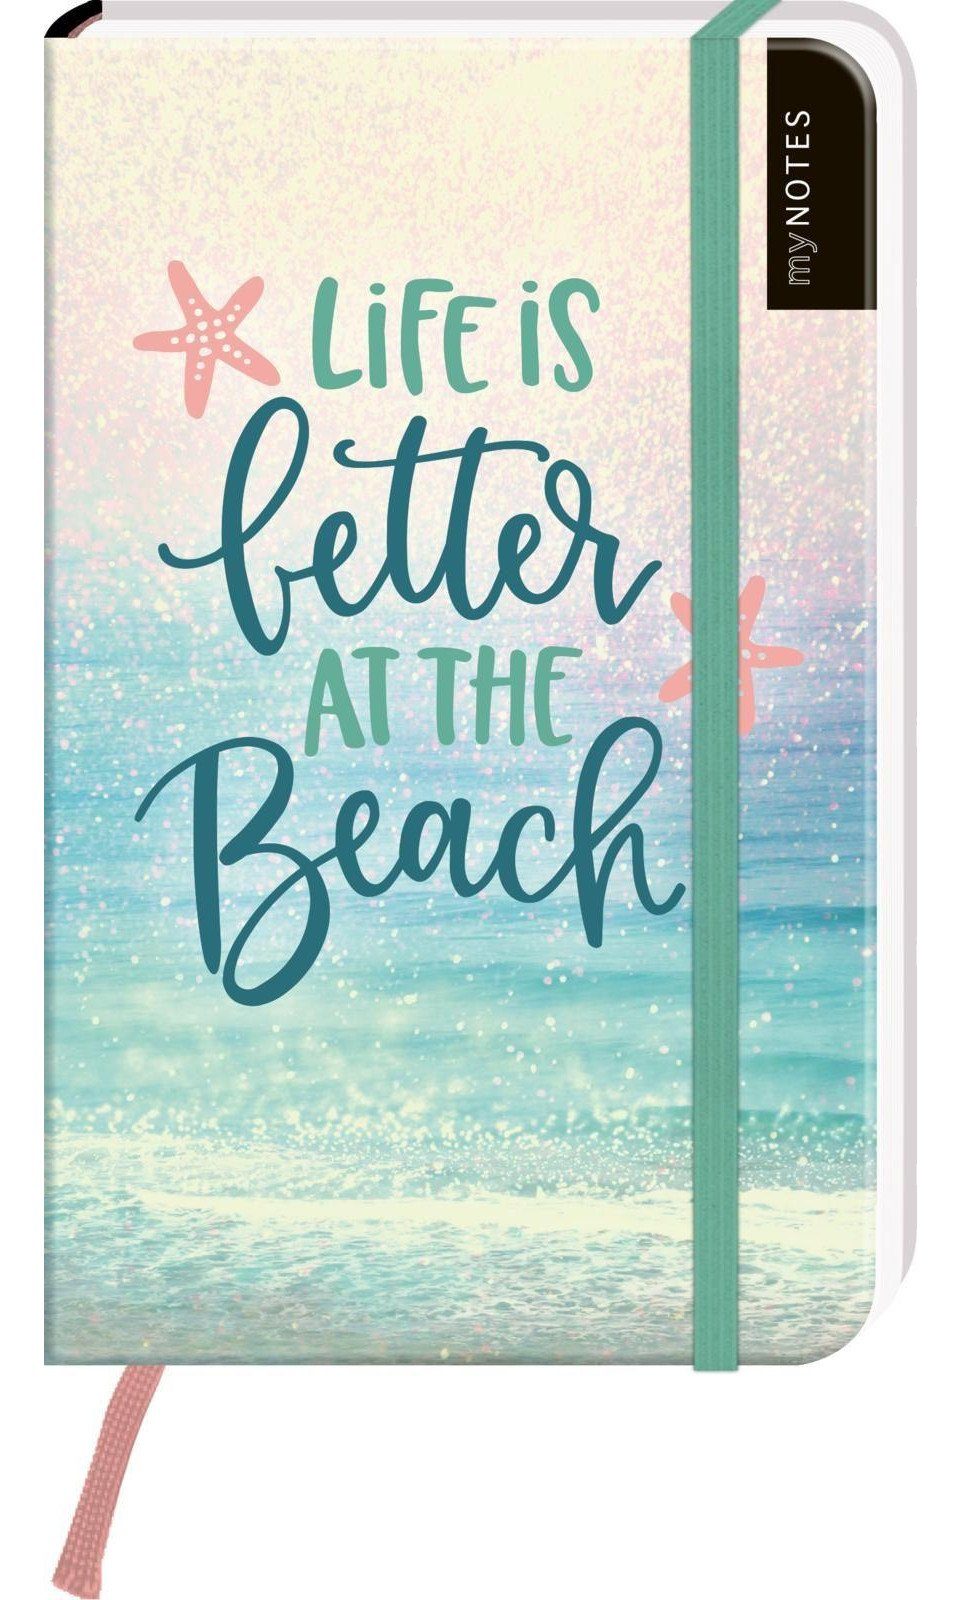 Ars Edition Notizbuch myNOTES Notizbuch A6: Life is better at the beach